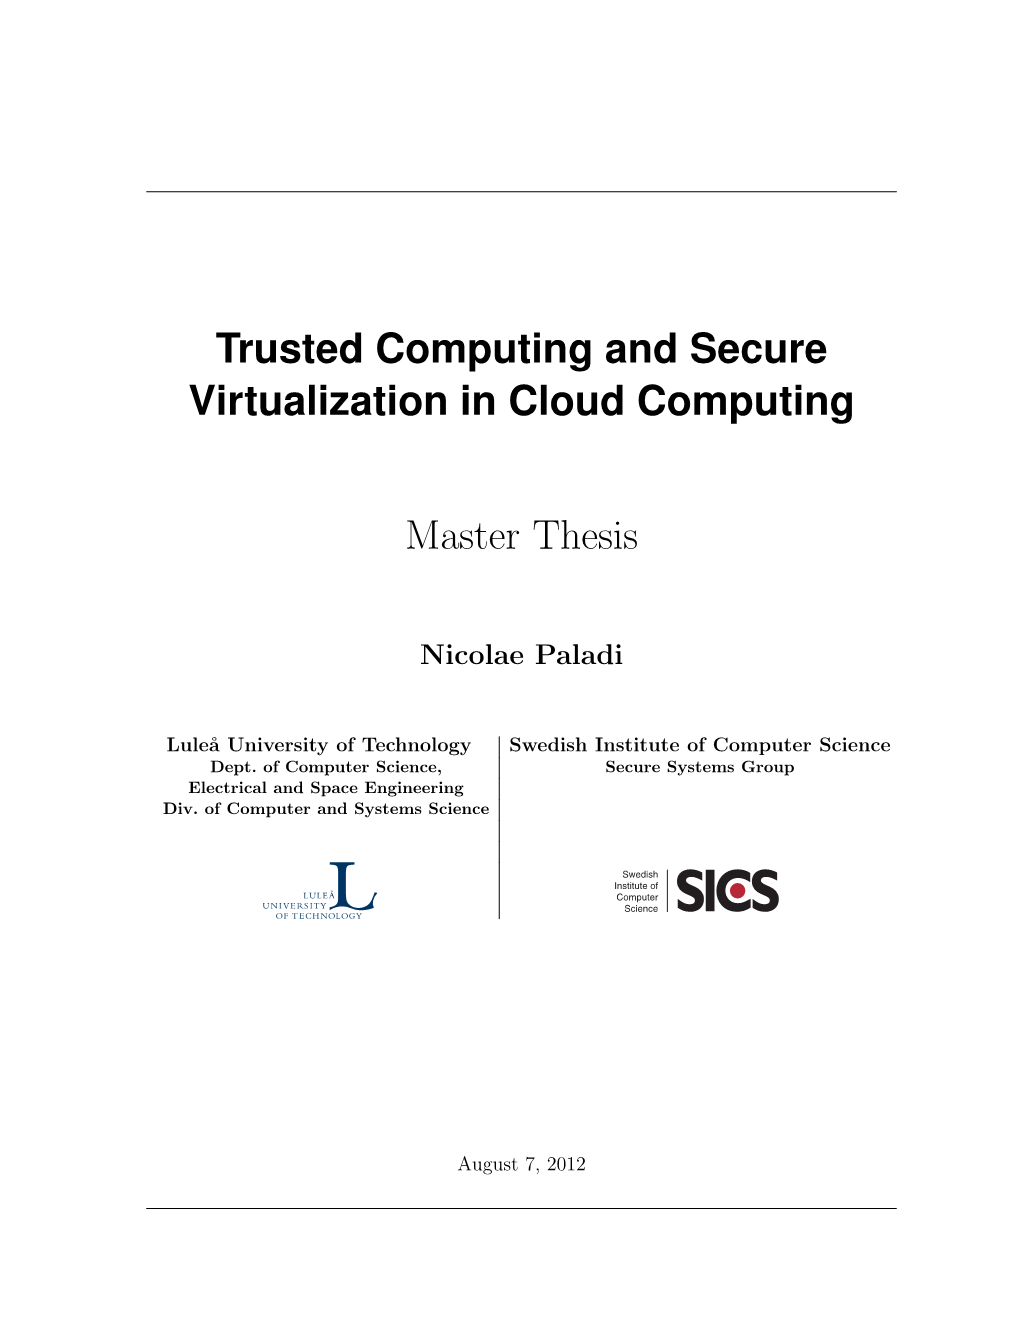 Trusted Computing and Secure Virtualization in Cloud Computing